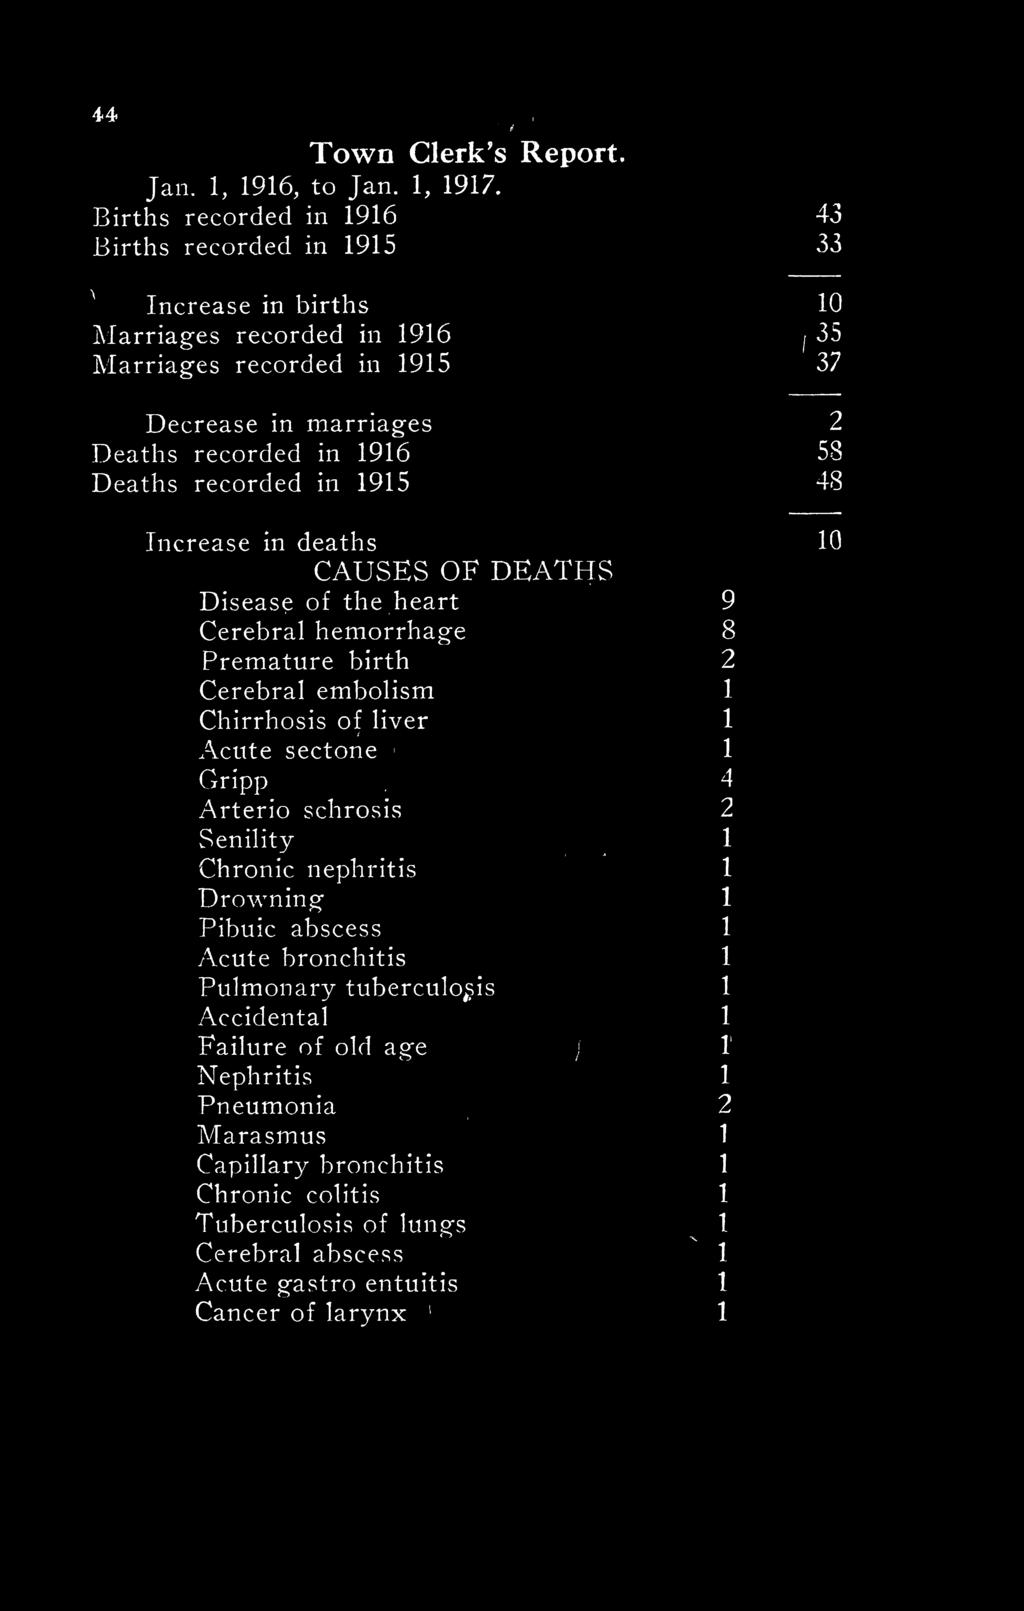 in 1915 / 43 33 10 35 37 2 53 48 Increase in deaths CAUSES OF DEATHS» Disease of the heart * ' < Cerebral hemorrhage Premature birth Cerebral embolism Chirrhosis of liver i Acute sectone